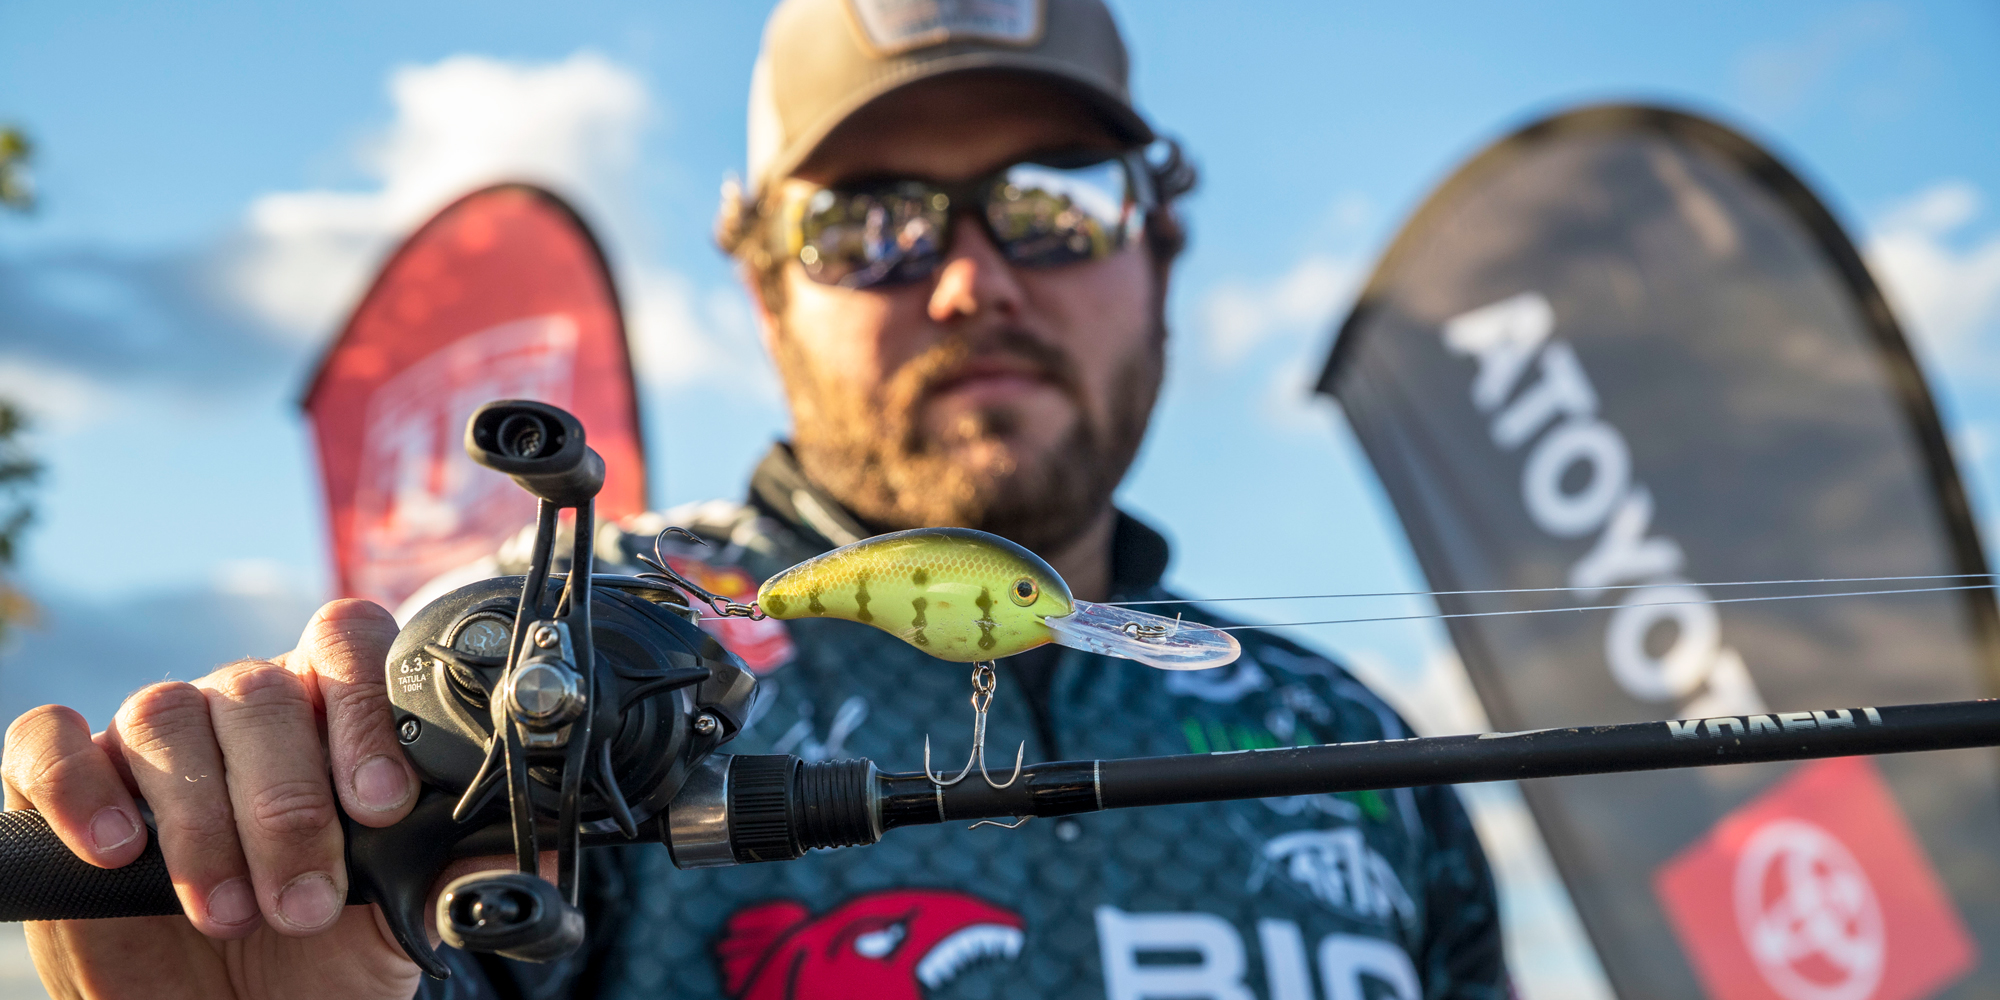 Top 10 Baits and Patterns for Stage Seven St. Clair - Major League Fishing